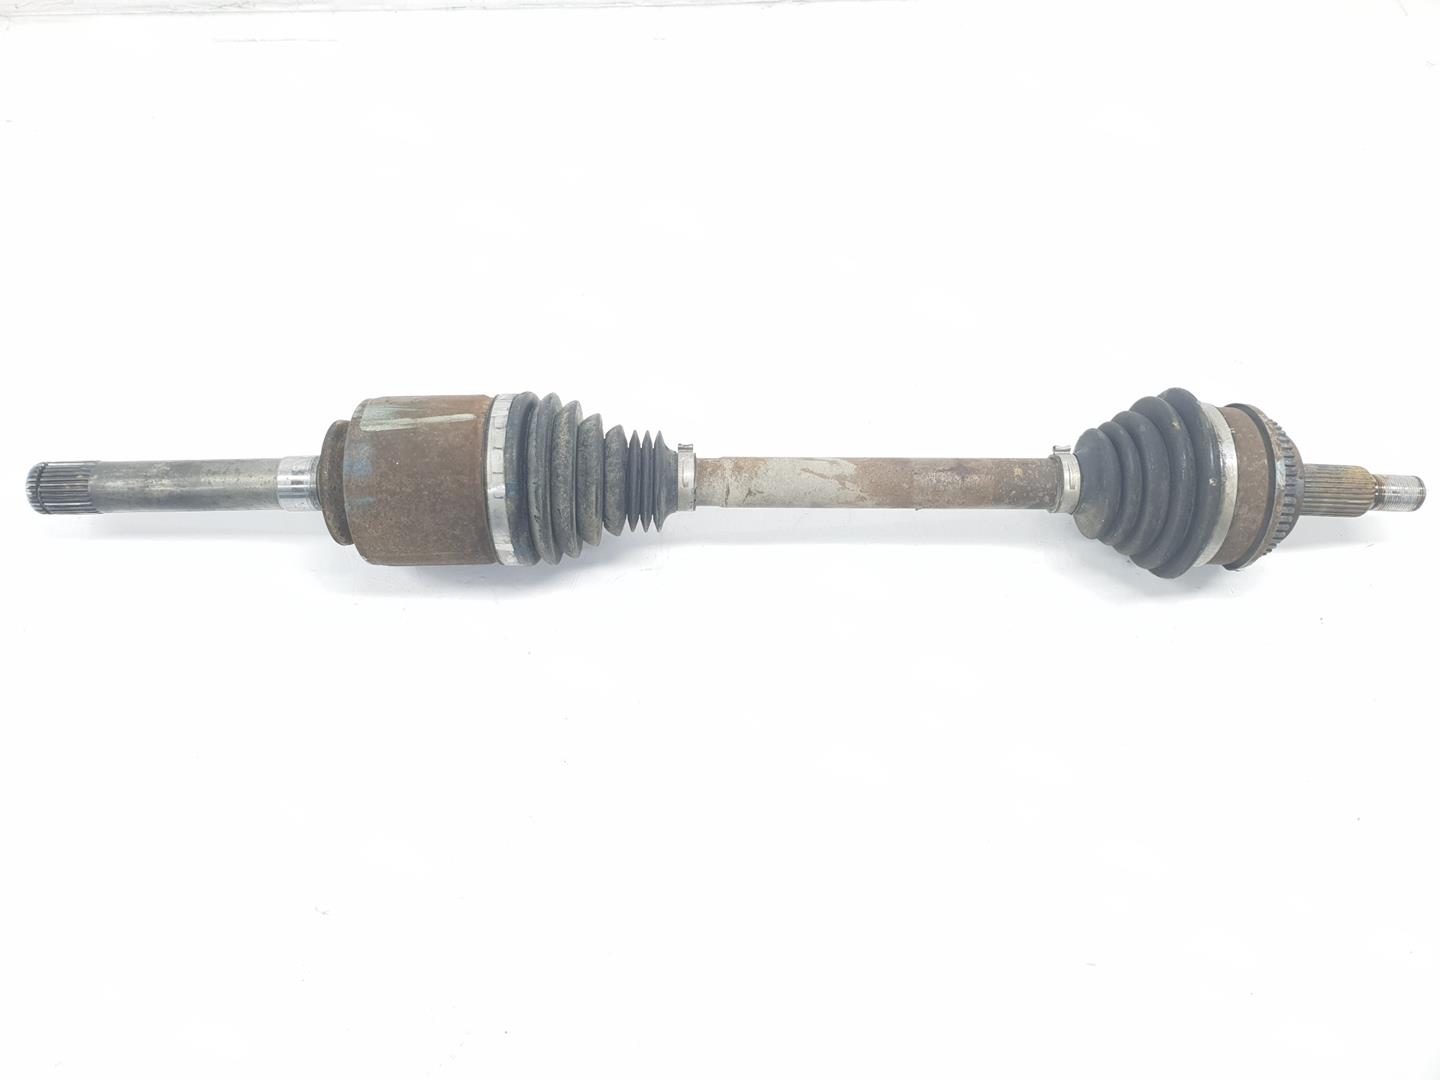 LAND ROVER Discovery 3 generation (2004-2009) Rear Right Driveshaft TOB500280, TOB500280 24237479